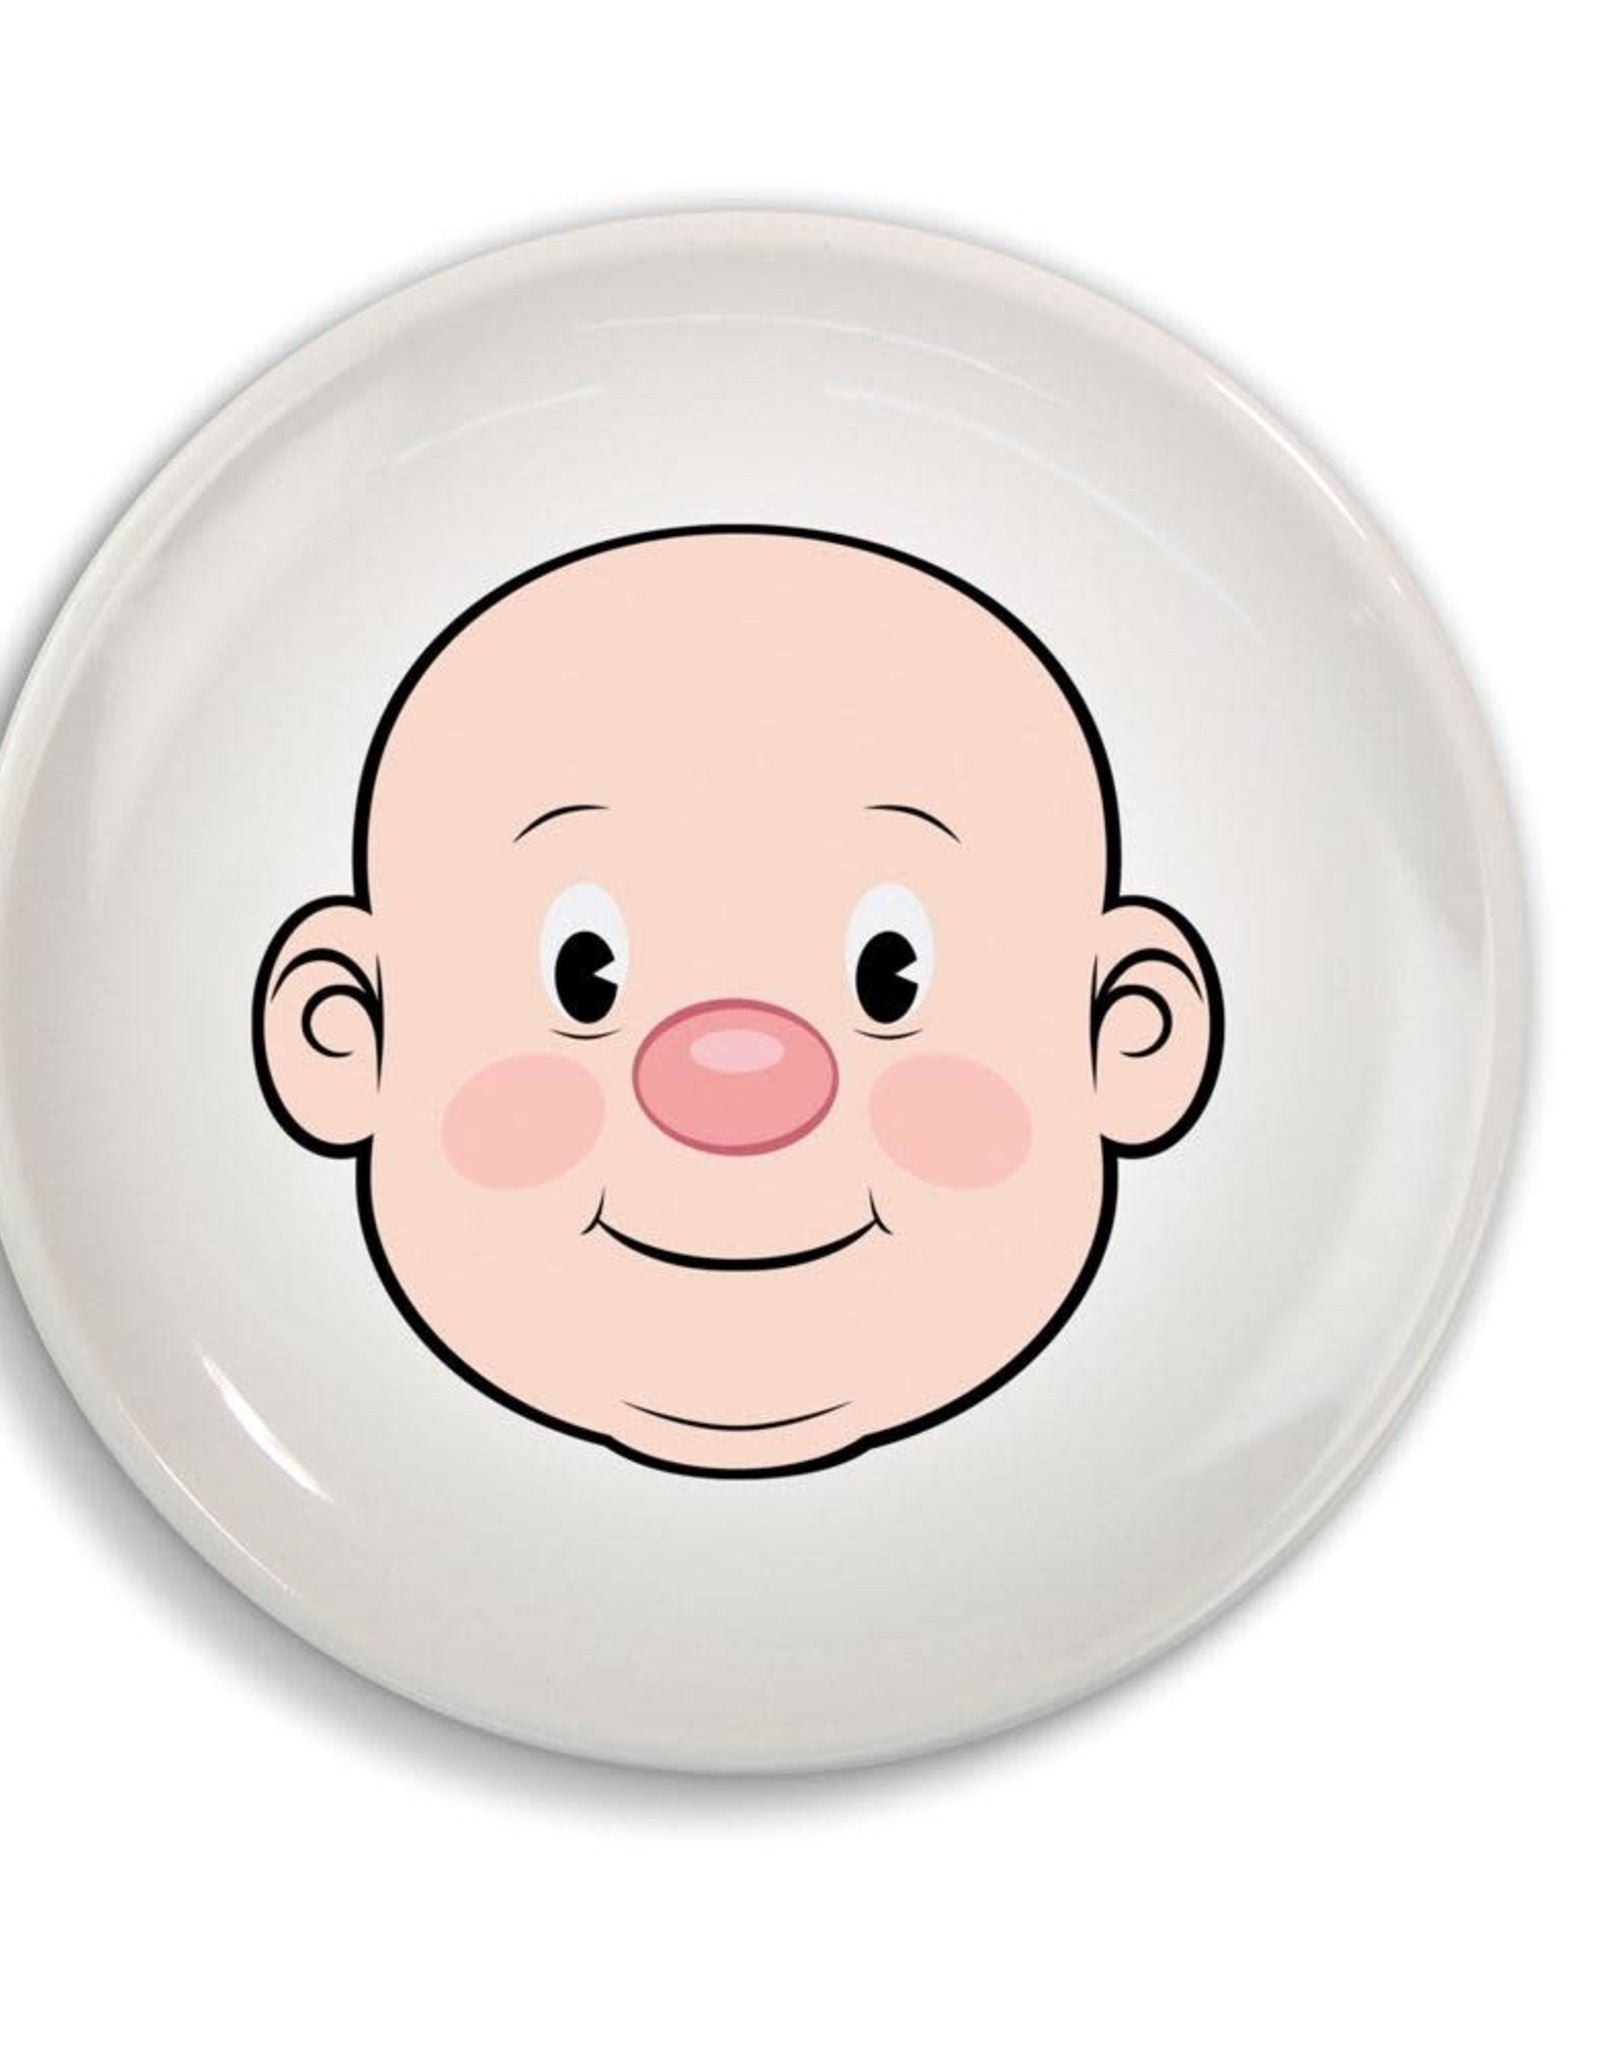 Fred & Friends FRED FOOD FACE - DINNER PLATE WHT